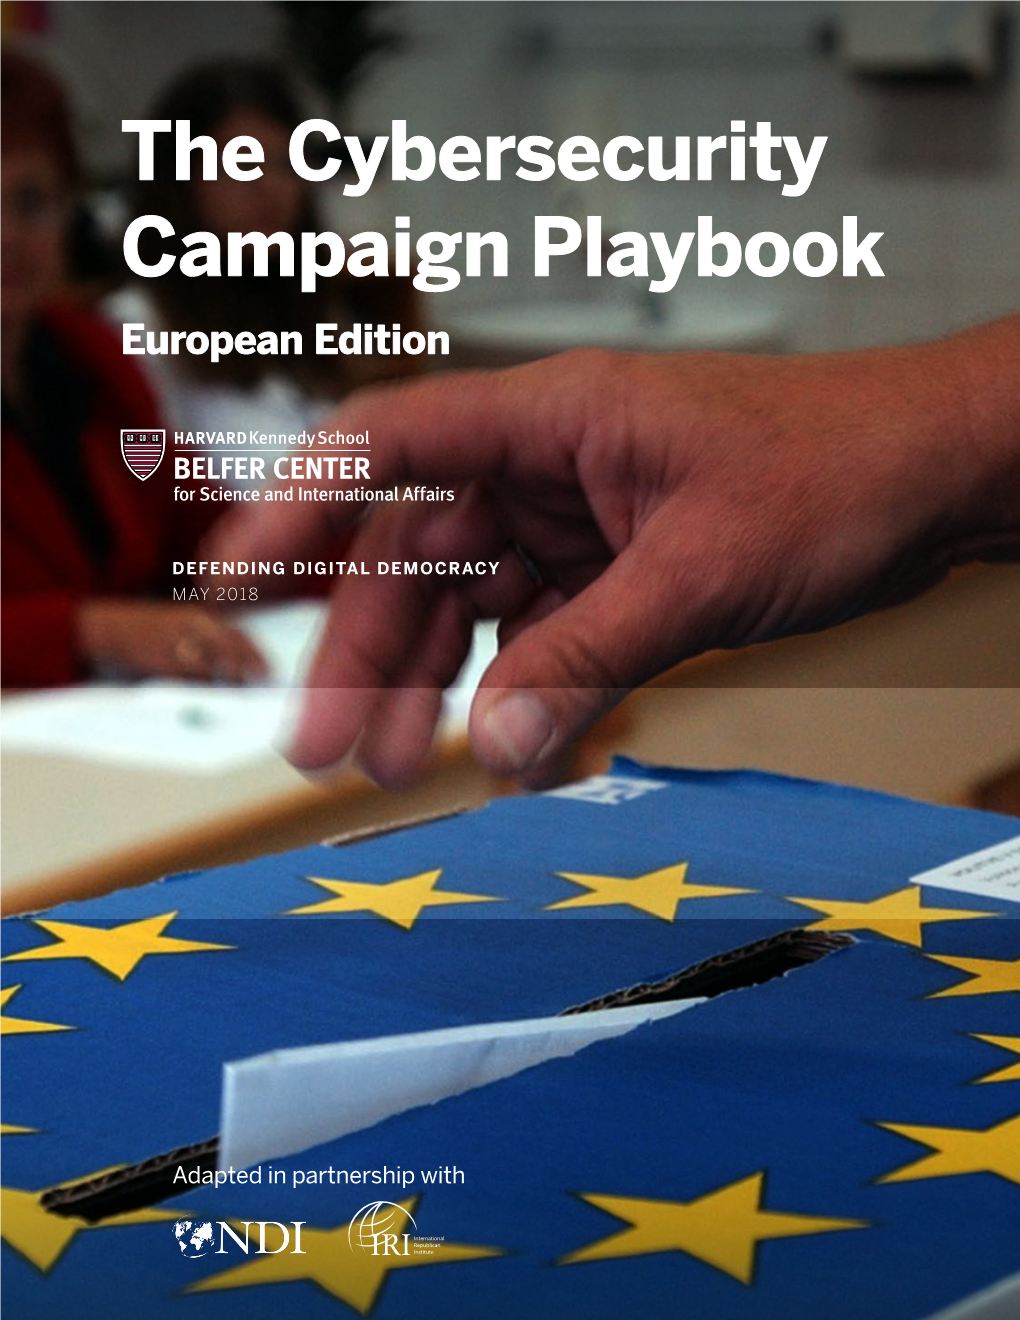 The Cybersecurity Campaign Playbook: European Edition